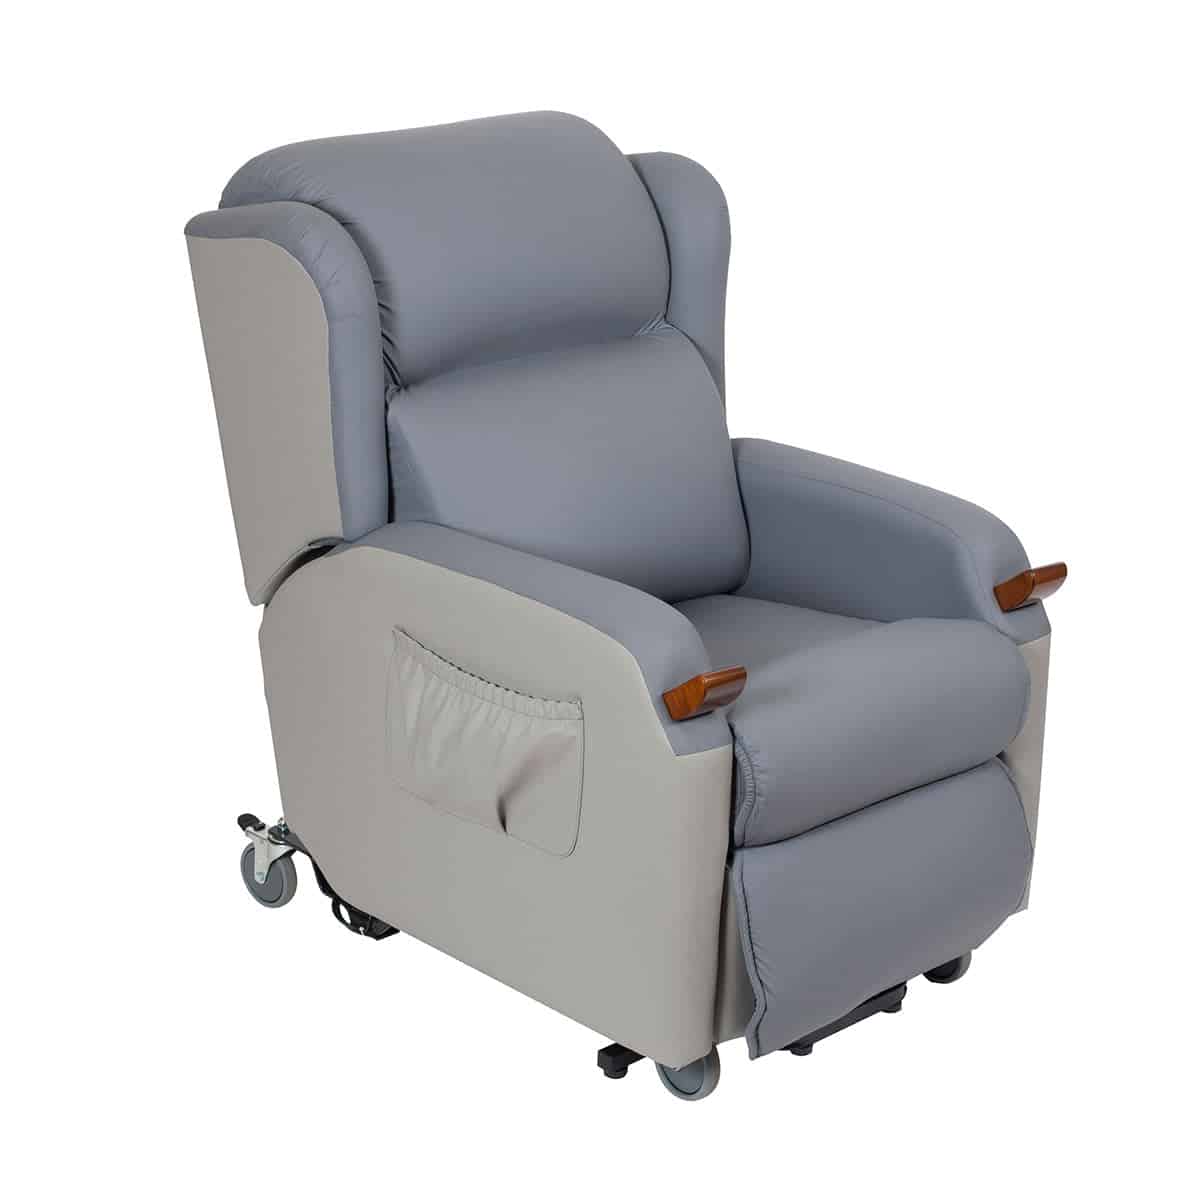 Air Comfort Mobile Compact Lift Chair – Single or Twin Motor